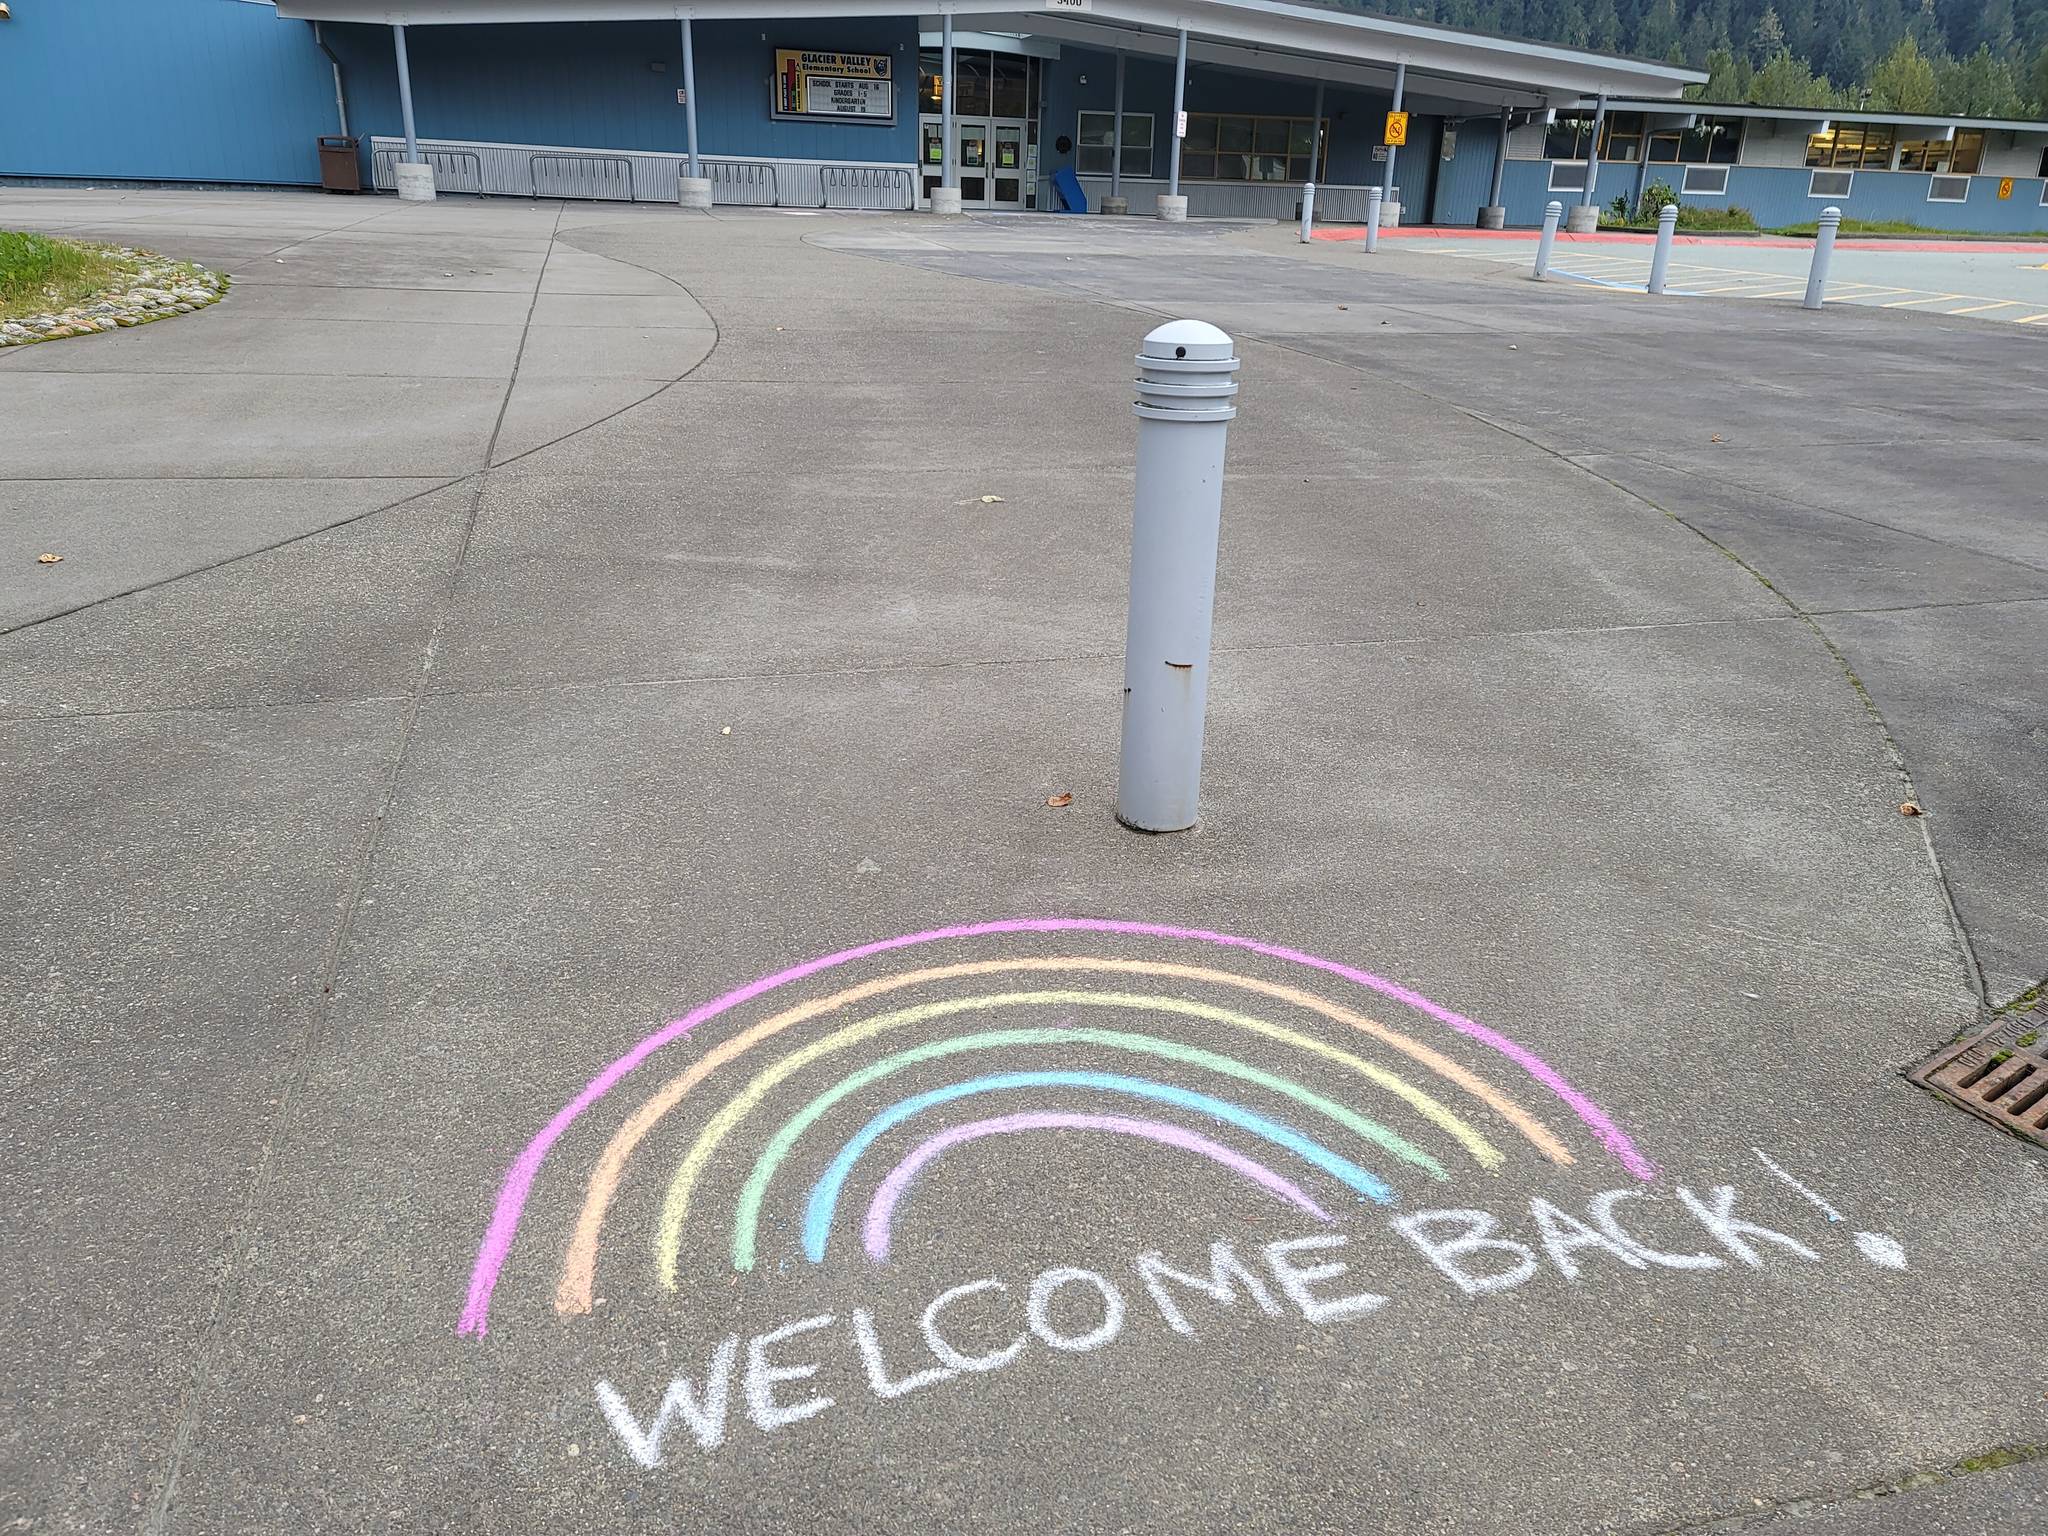 A sidewalk-based message welcomes students and staff back to Glacier Valley Elementary School ahead of the first day of school on Monday, Aug. 16. (Ben Hohenstatt/Juneau Empire)